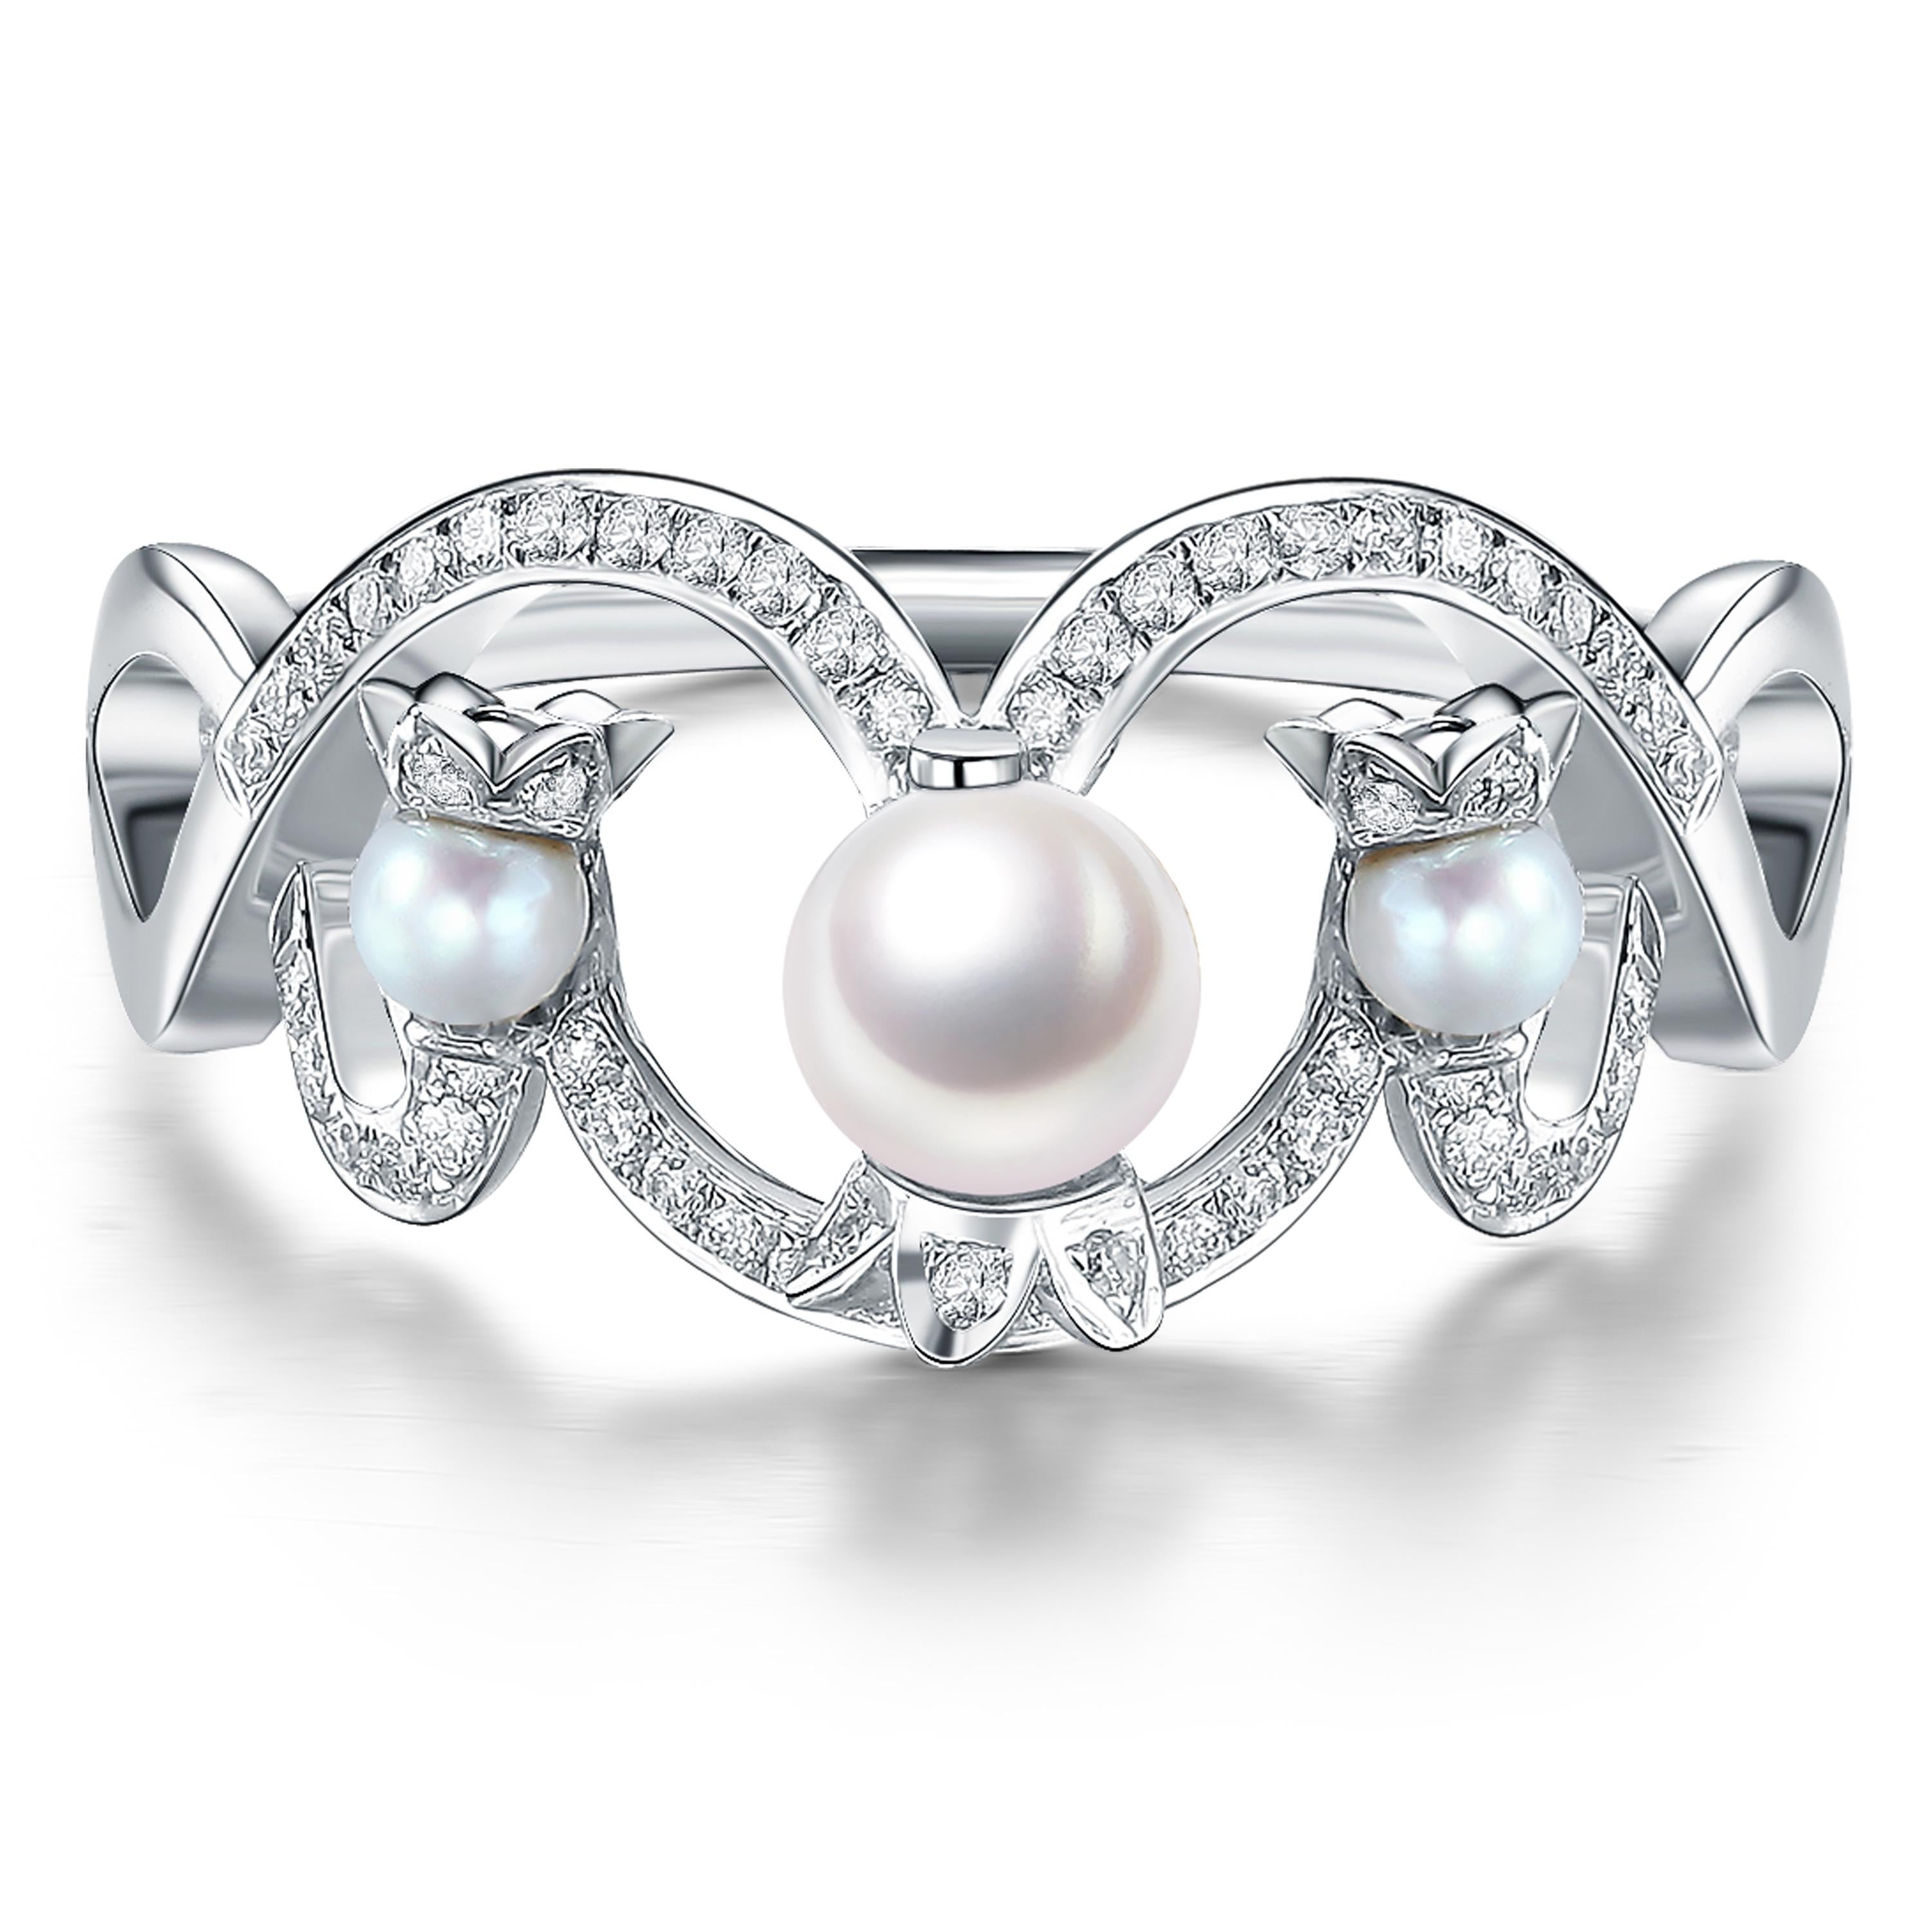 Description:
Lily of the Valley large ring with pearls and 0.2ct white diamonds and 1-3mm pearls, set in 9ct white gold with a high polish.

Inspiration:
The lily of the valley flower is one of the most beloved, opulent wedding flowers, which